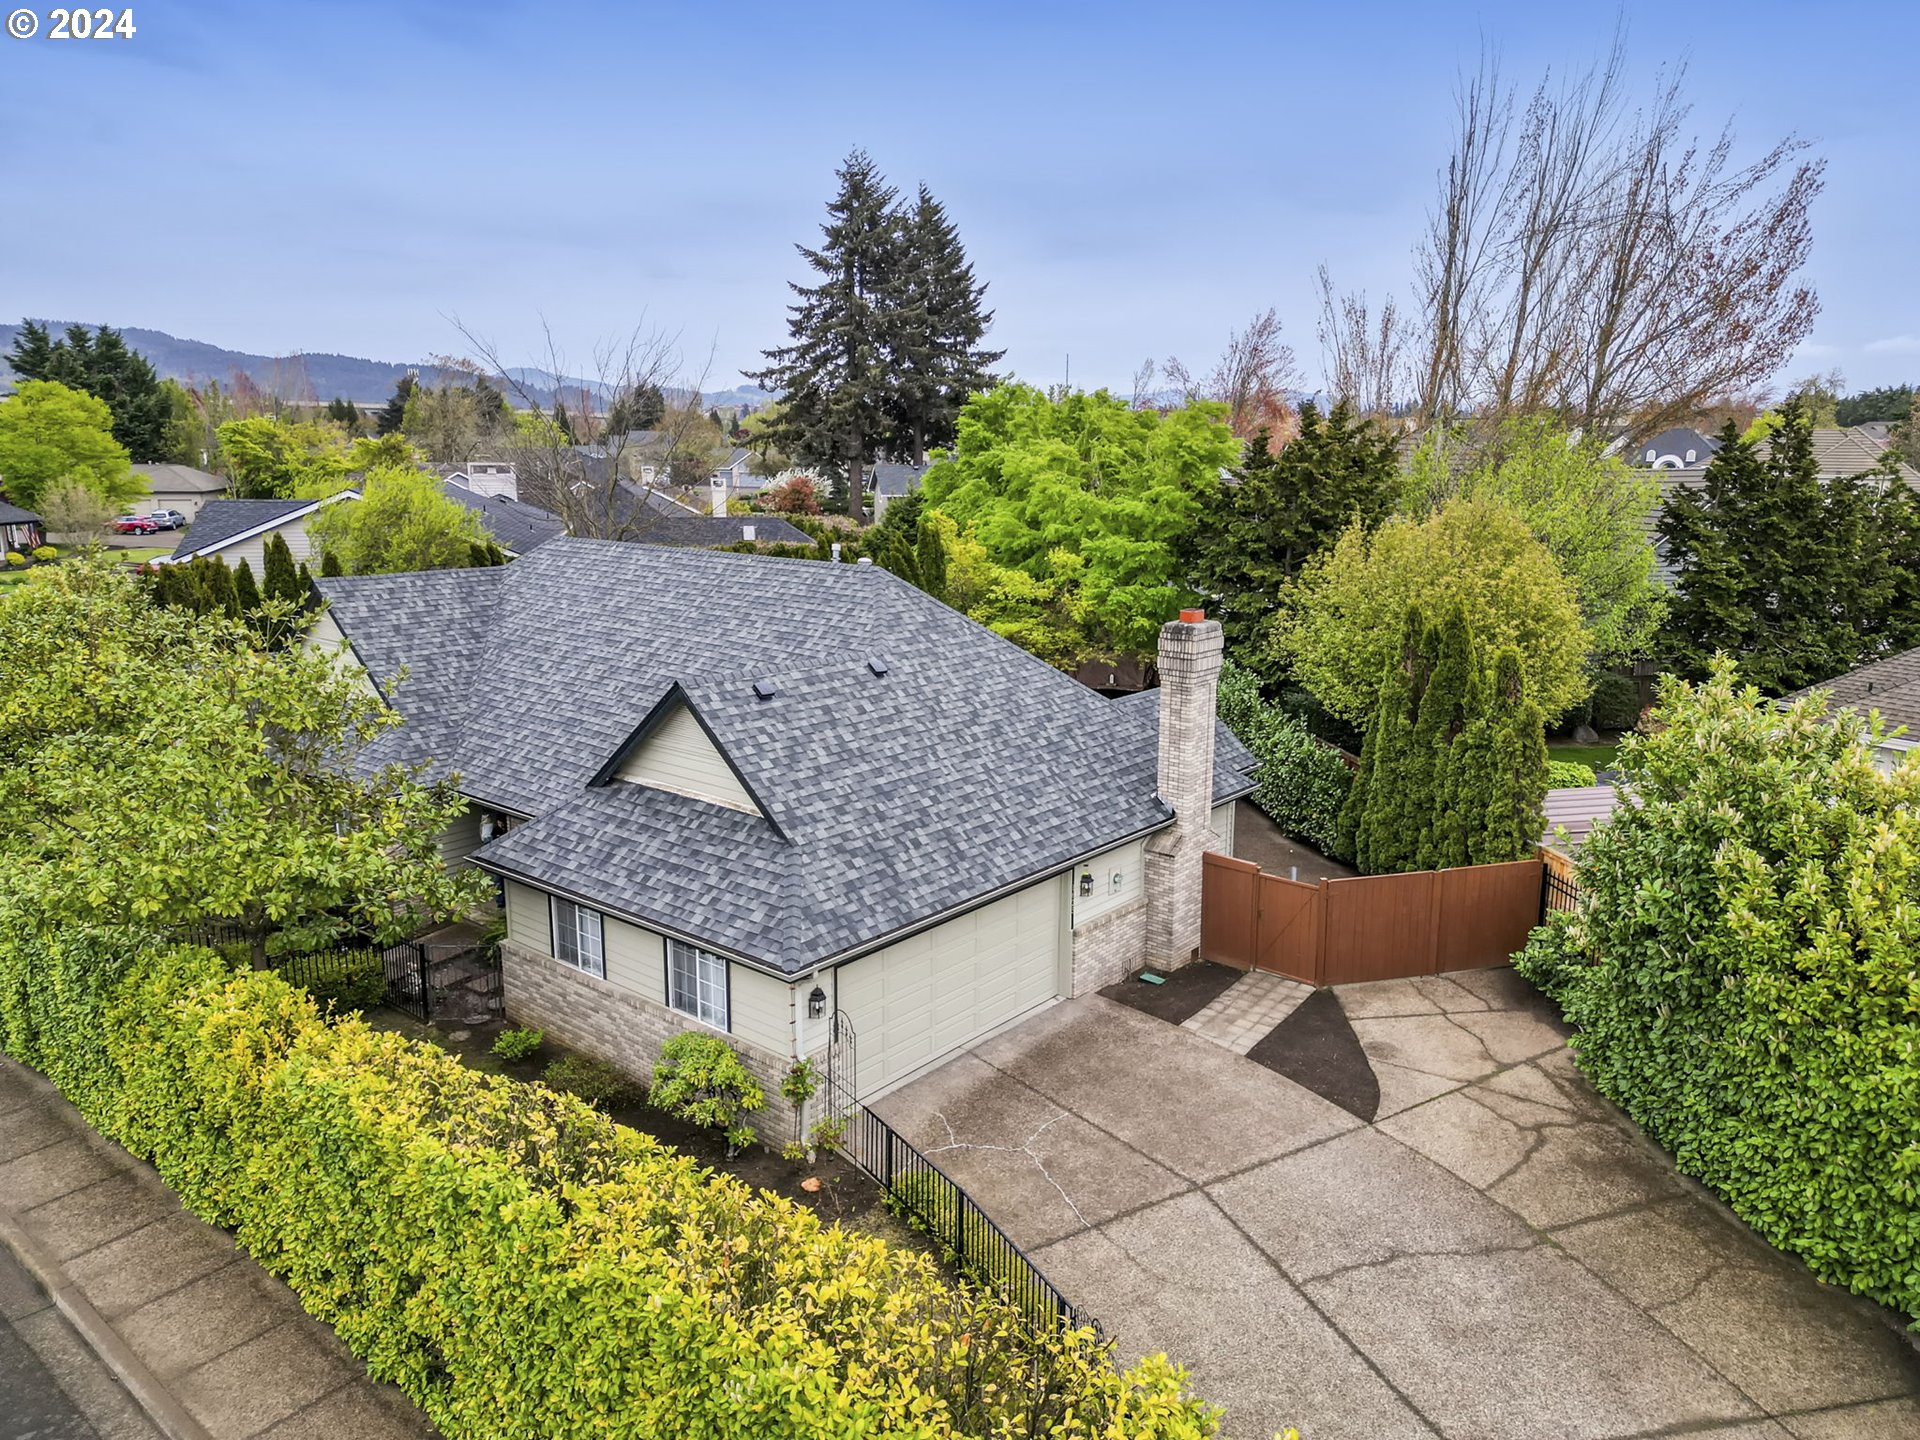 1625 VICTORIAN WAY, Eugene, OR 97401